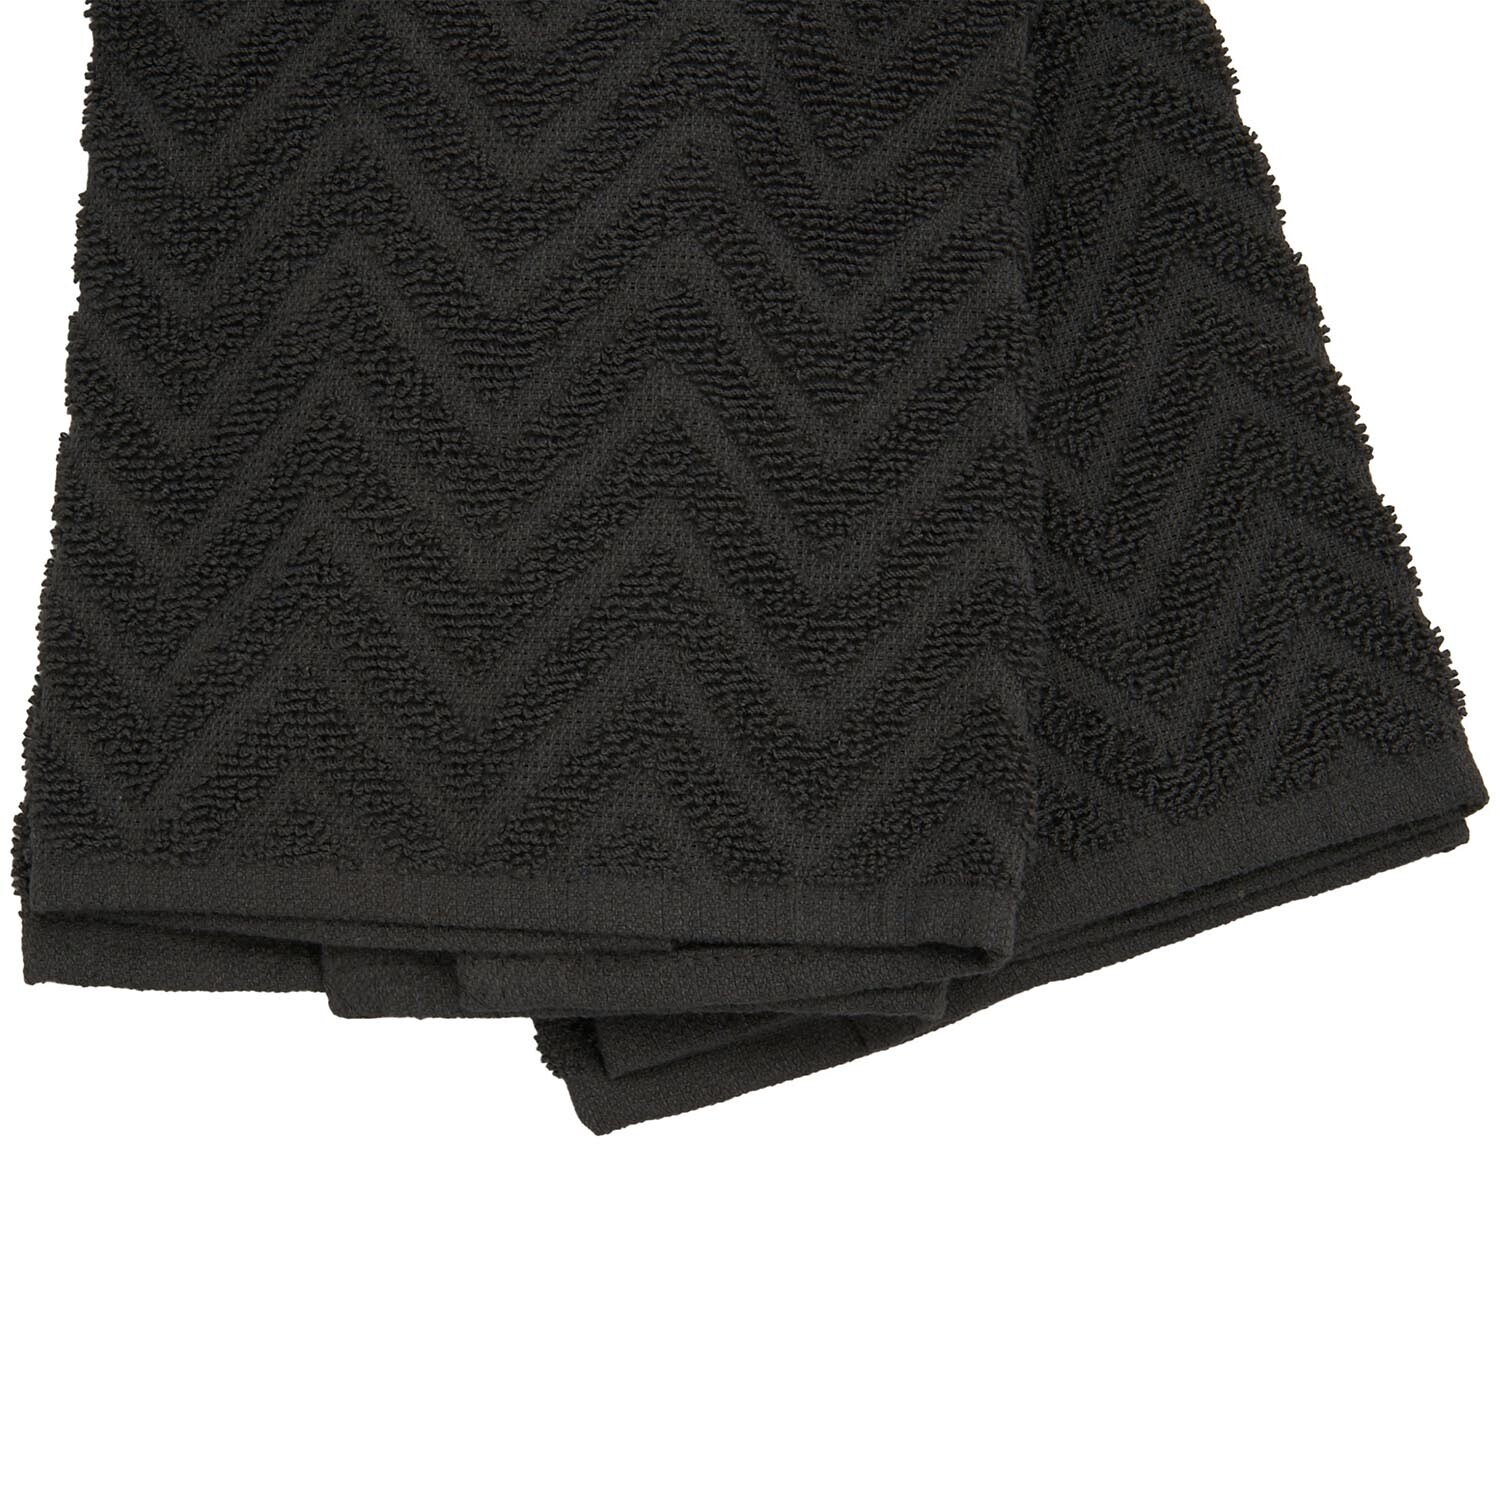 Pack of 2 Jacquard Terry Kitchen Towels - Dark Grey Image 3